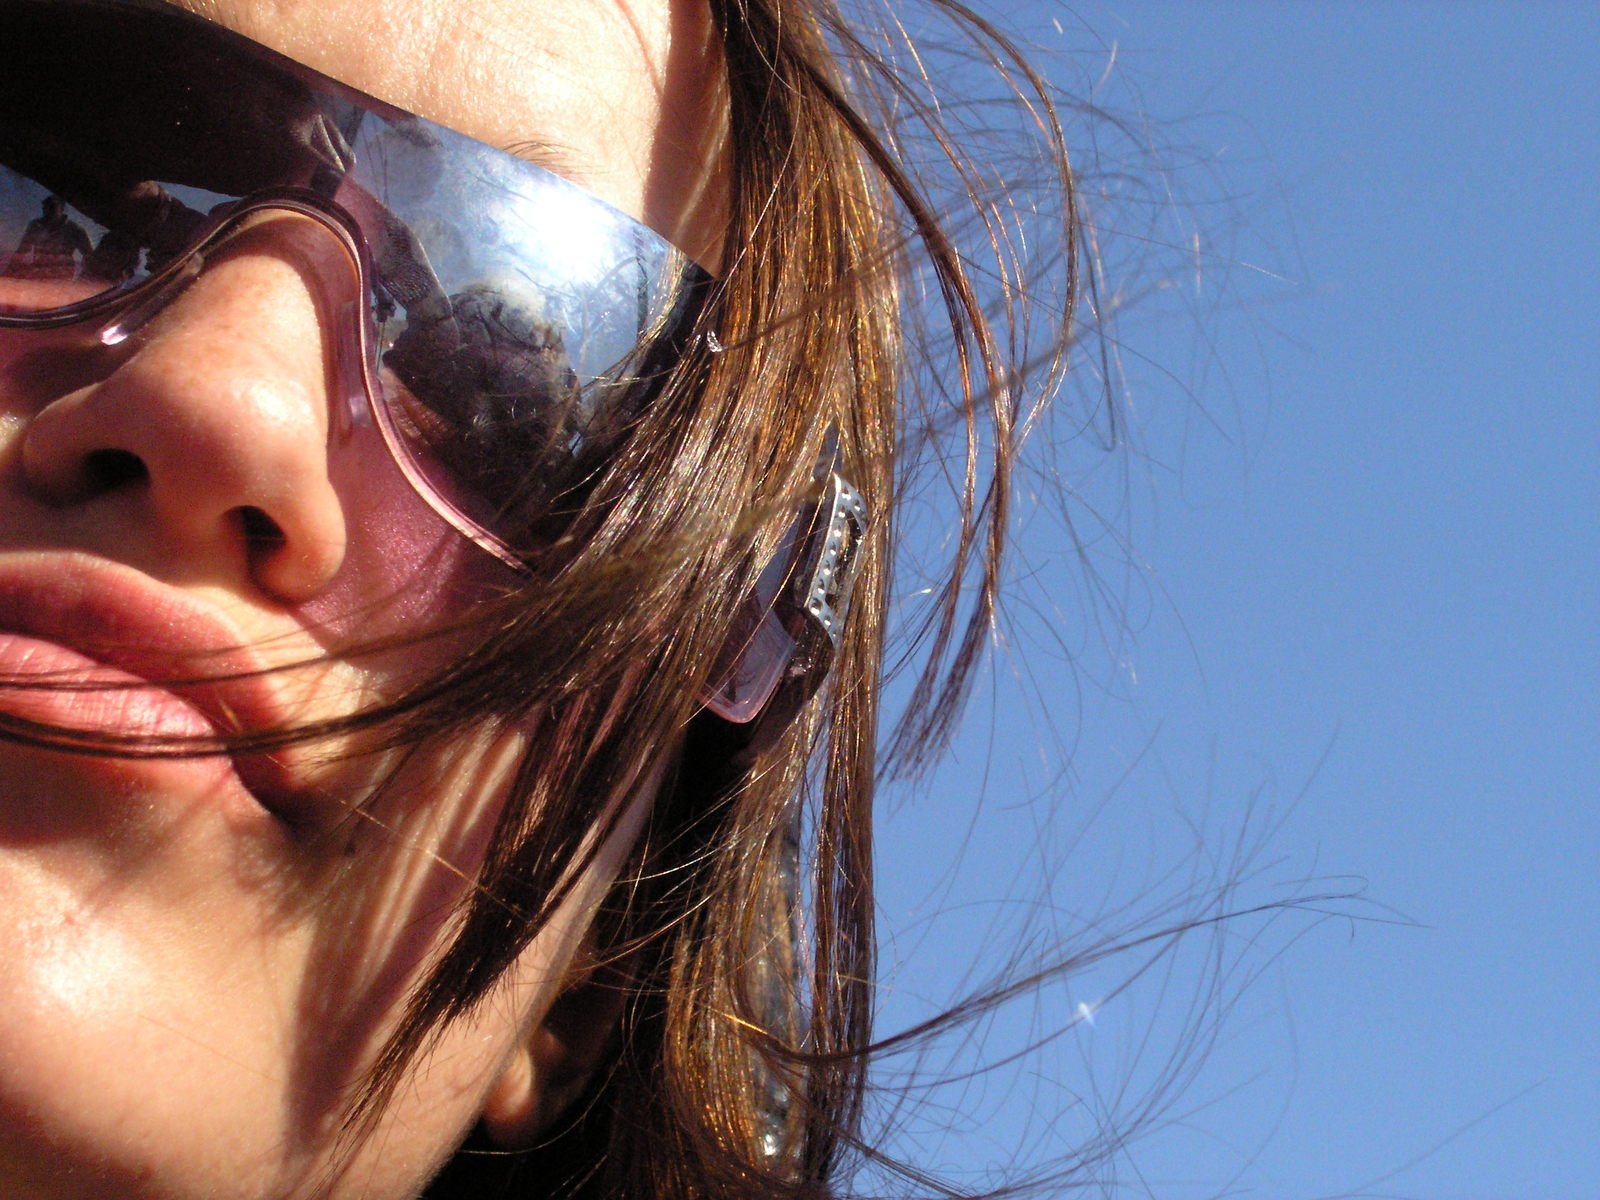 a close up of a woman's face wearing sun glasses